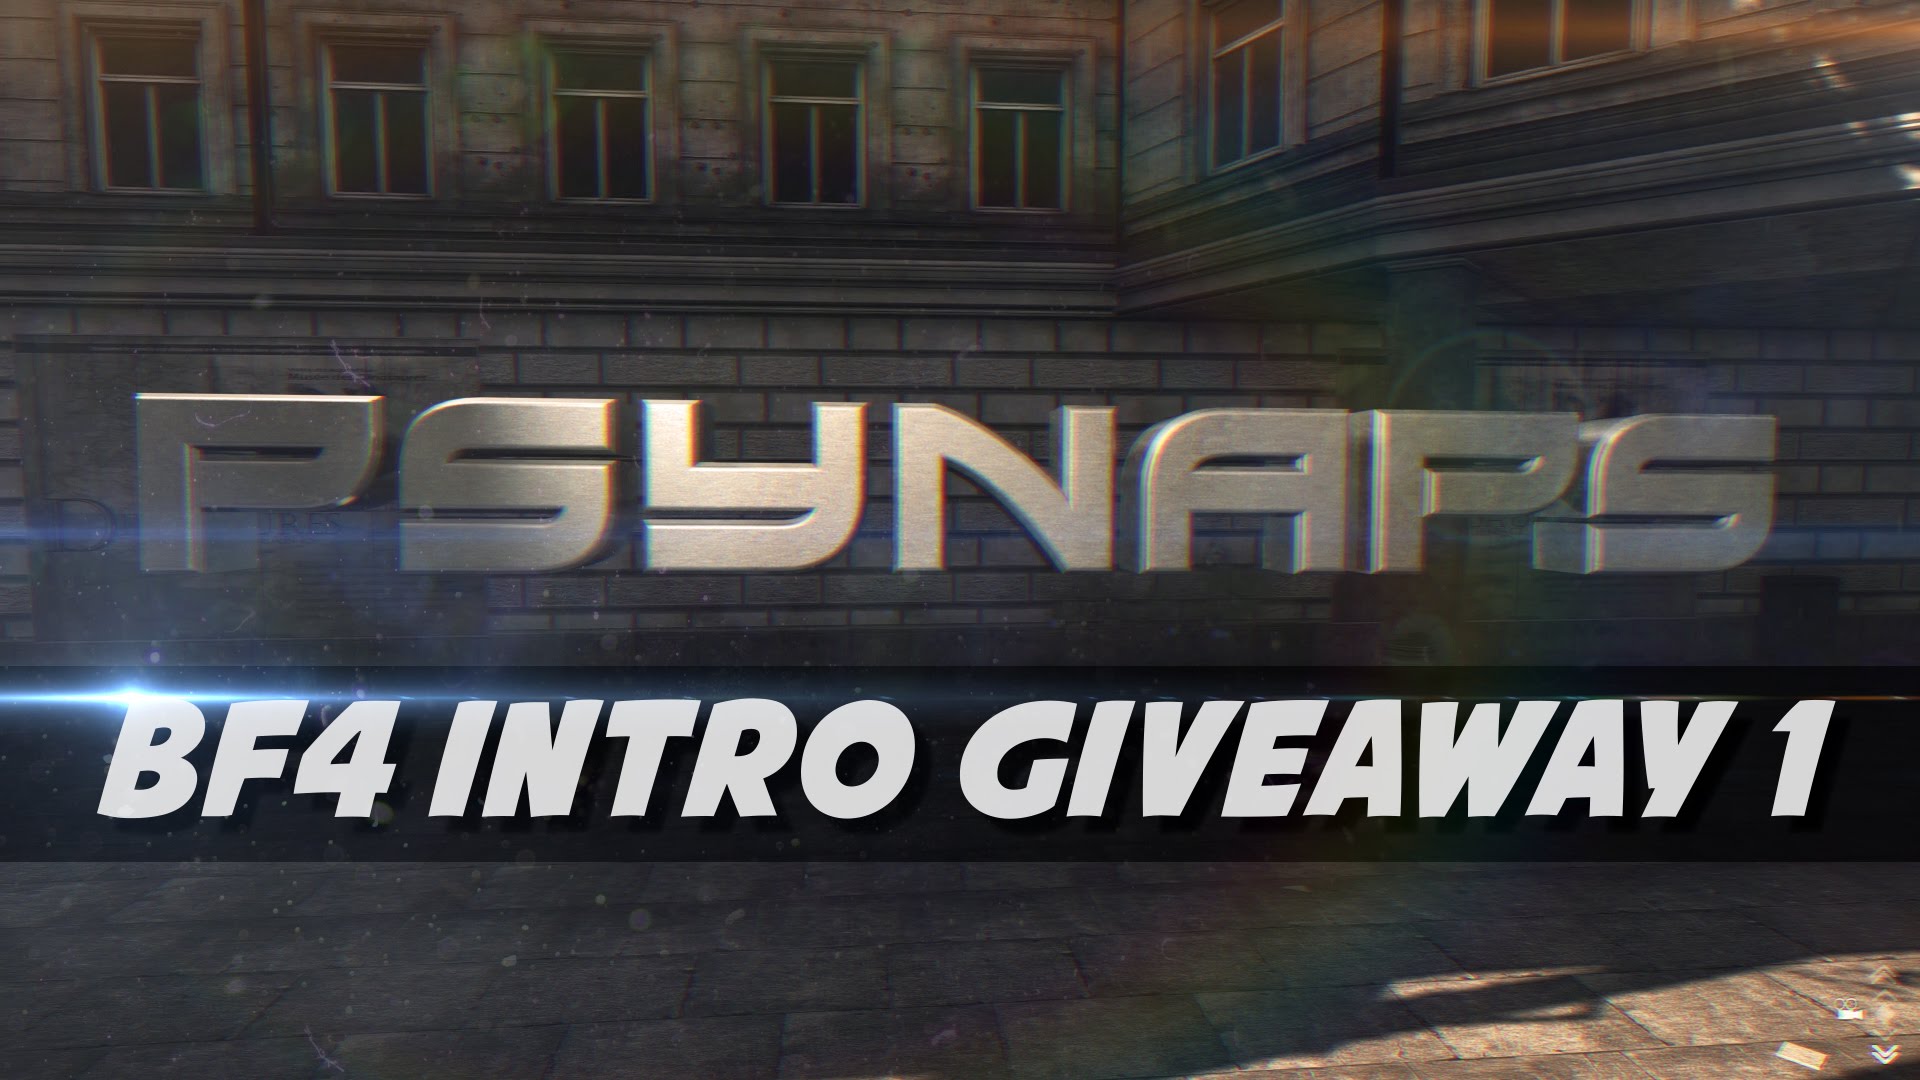 [Psynaps] BF4 Intro Giveaway #1 – With Your name!